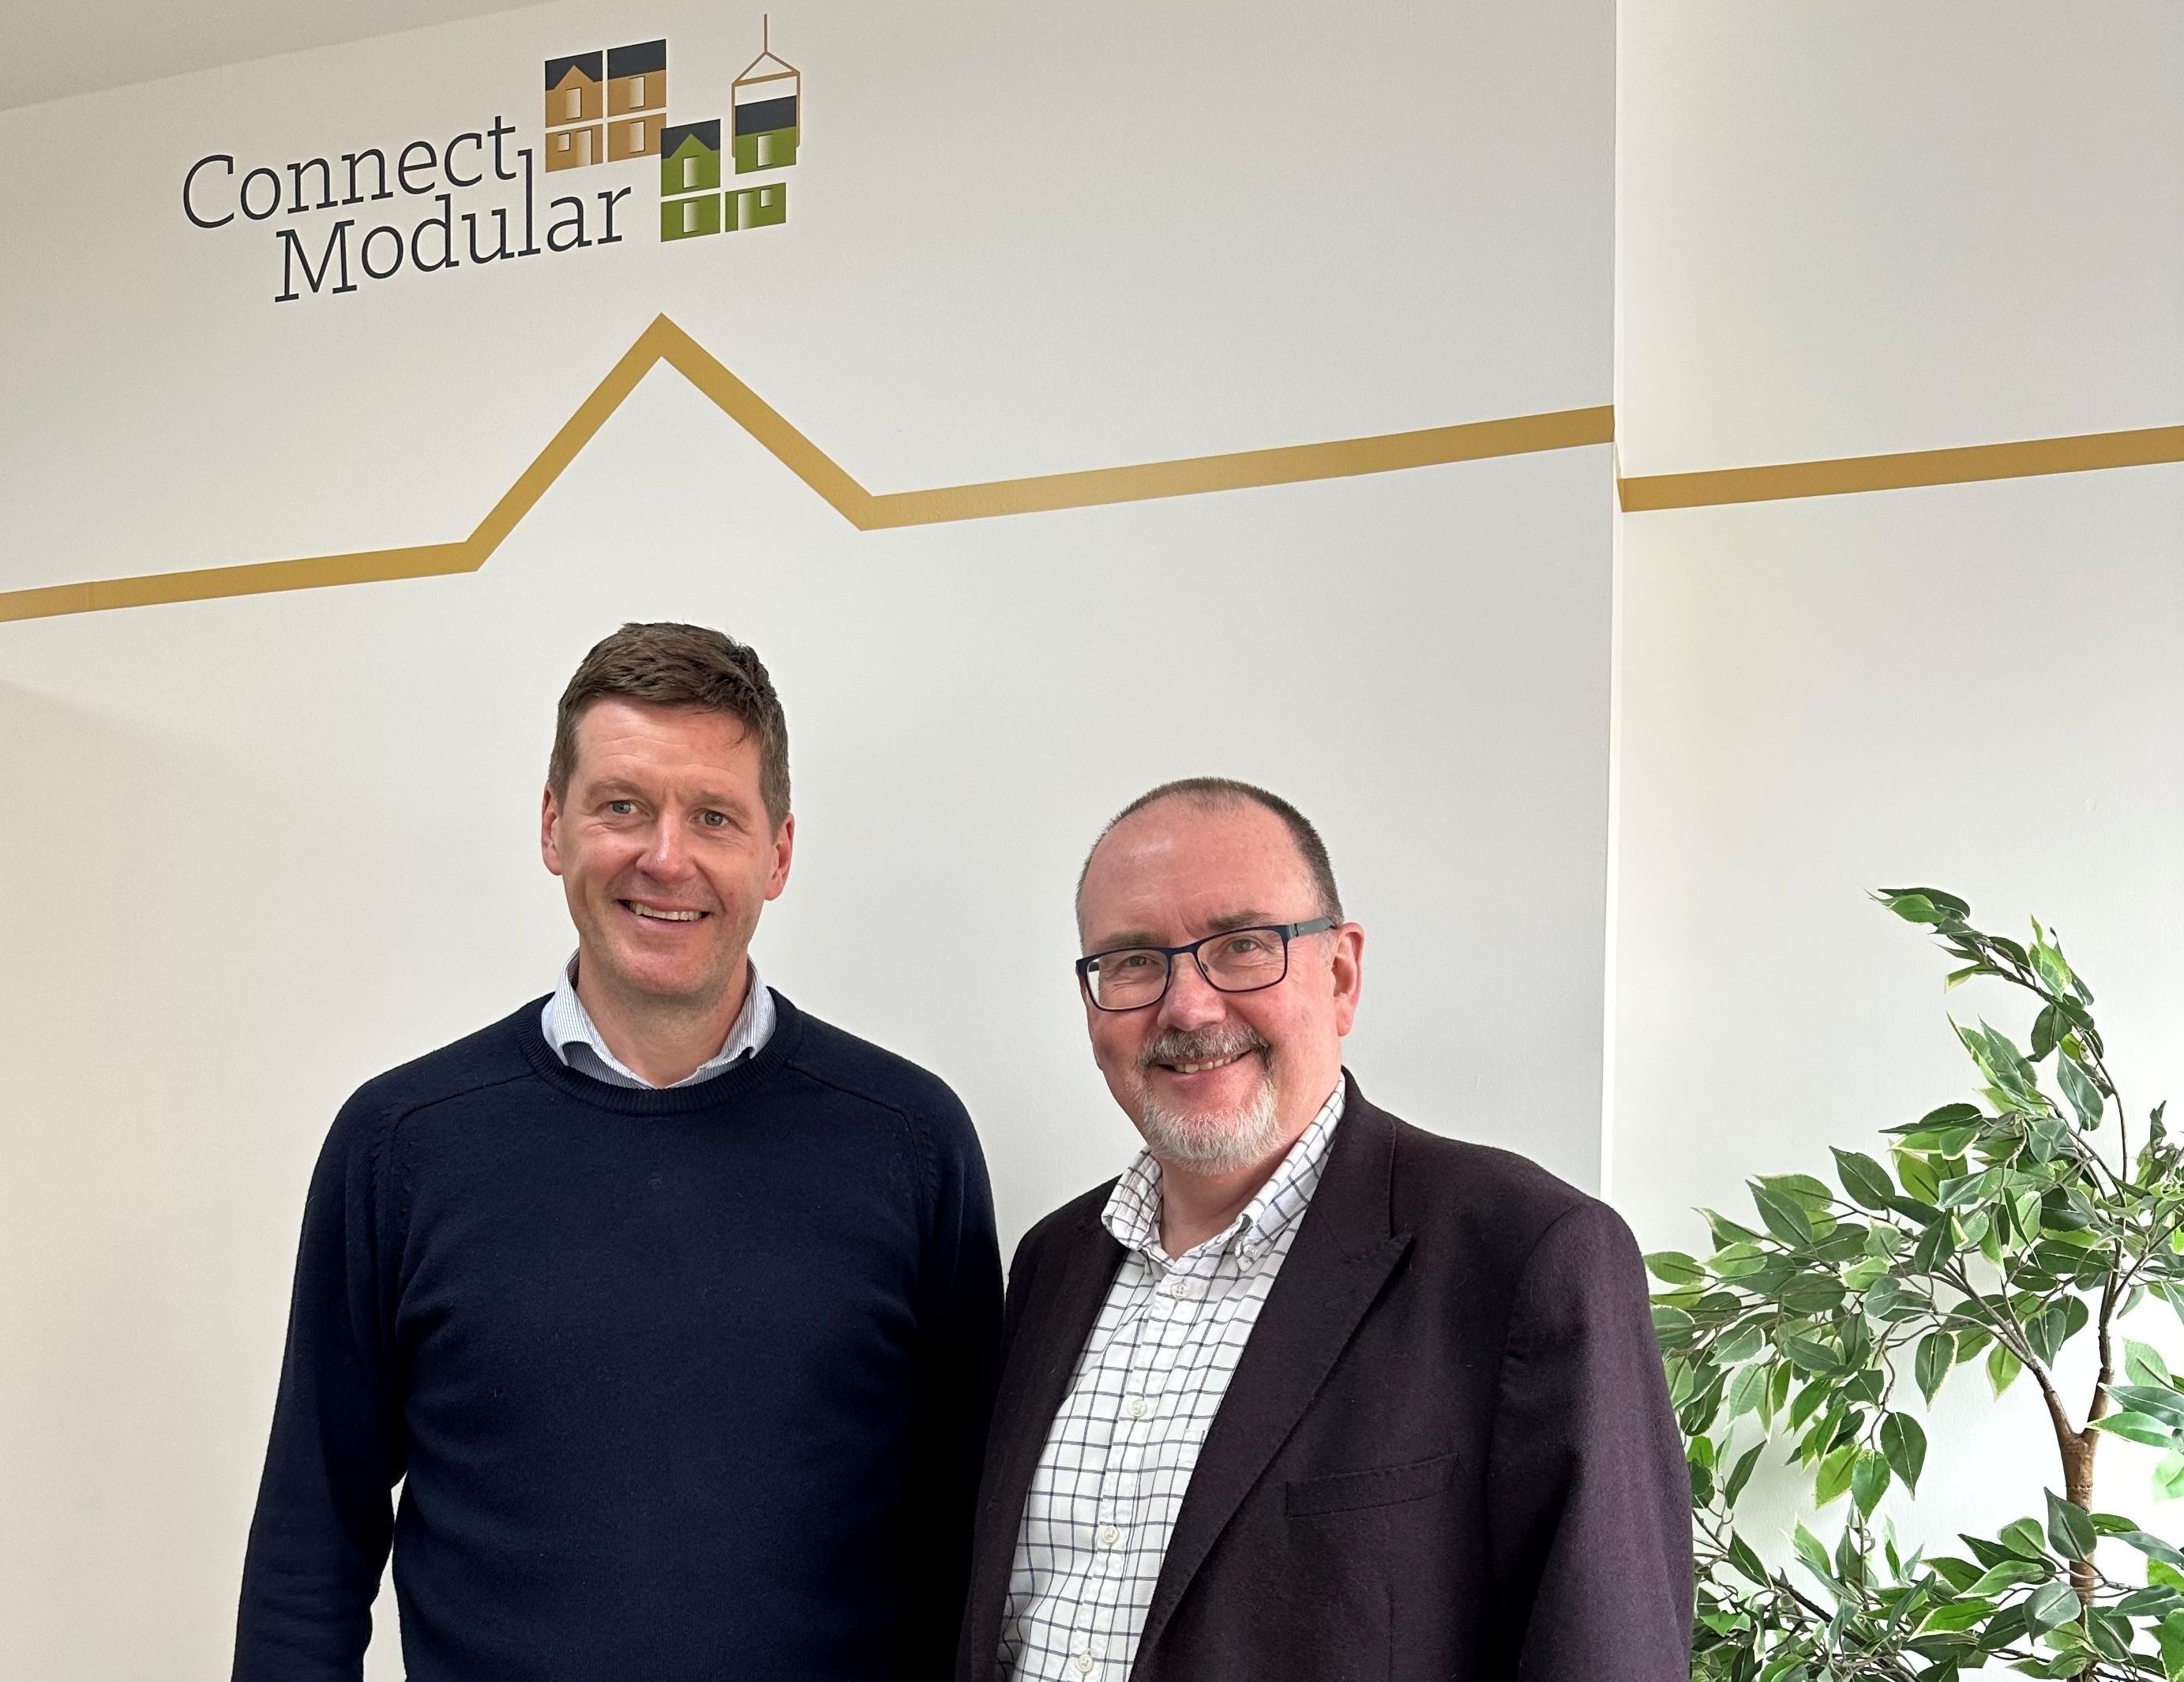 Paul Hillard and Duncan Robb appointed to board of Connect Modular